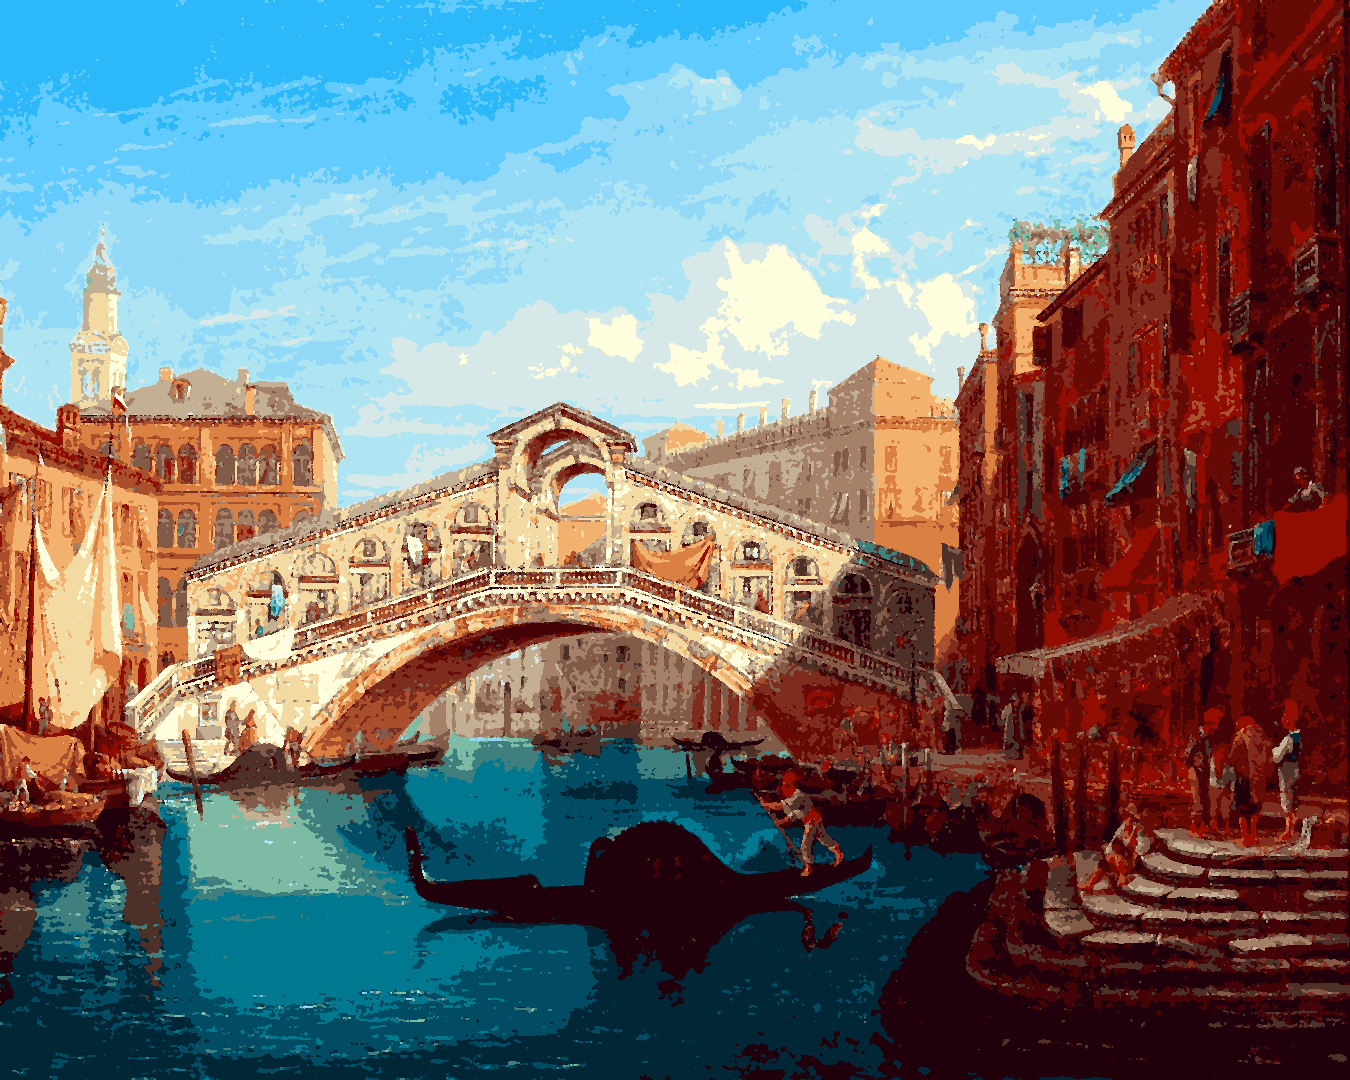 Venice, Italy Collection PD (39) - View of the Rialto Bridge by Gustaf Wilhelm Palm - Van-Go Paint-By-Number Kit